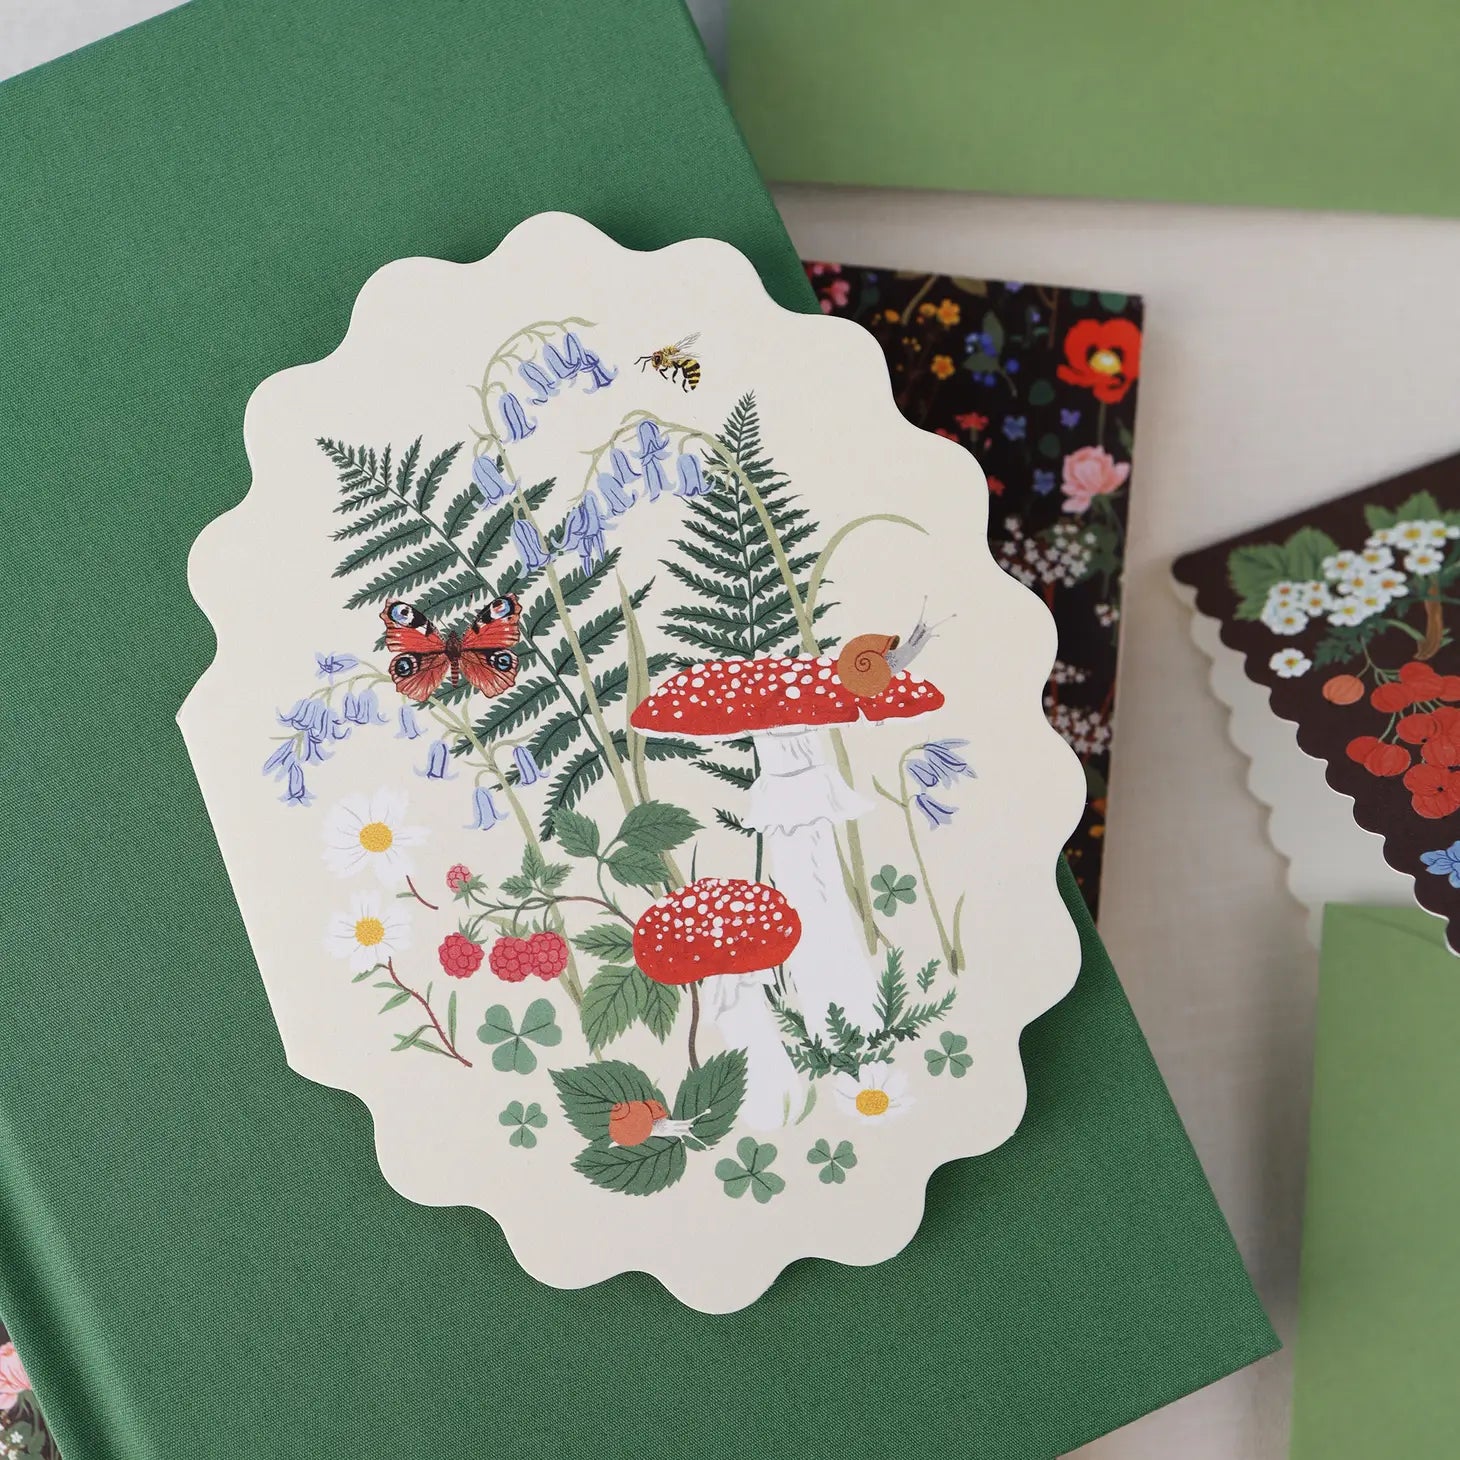 Card 'Woodland' by Botanica Paper co.